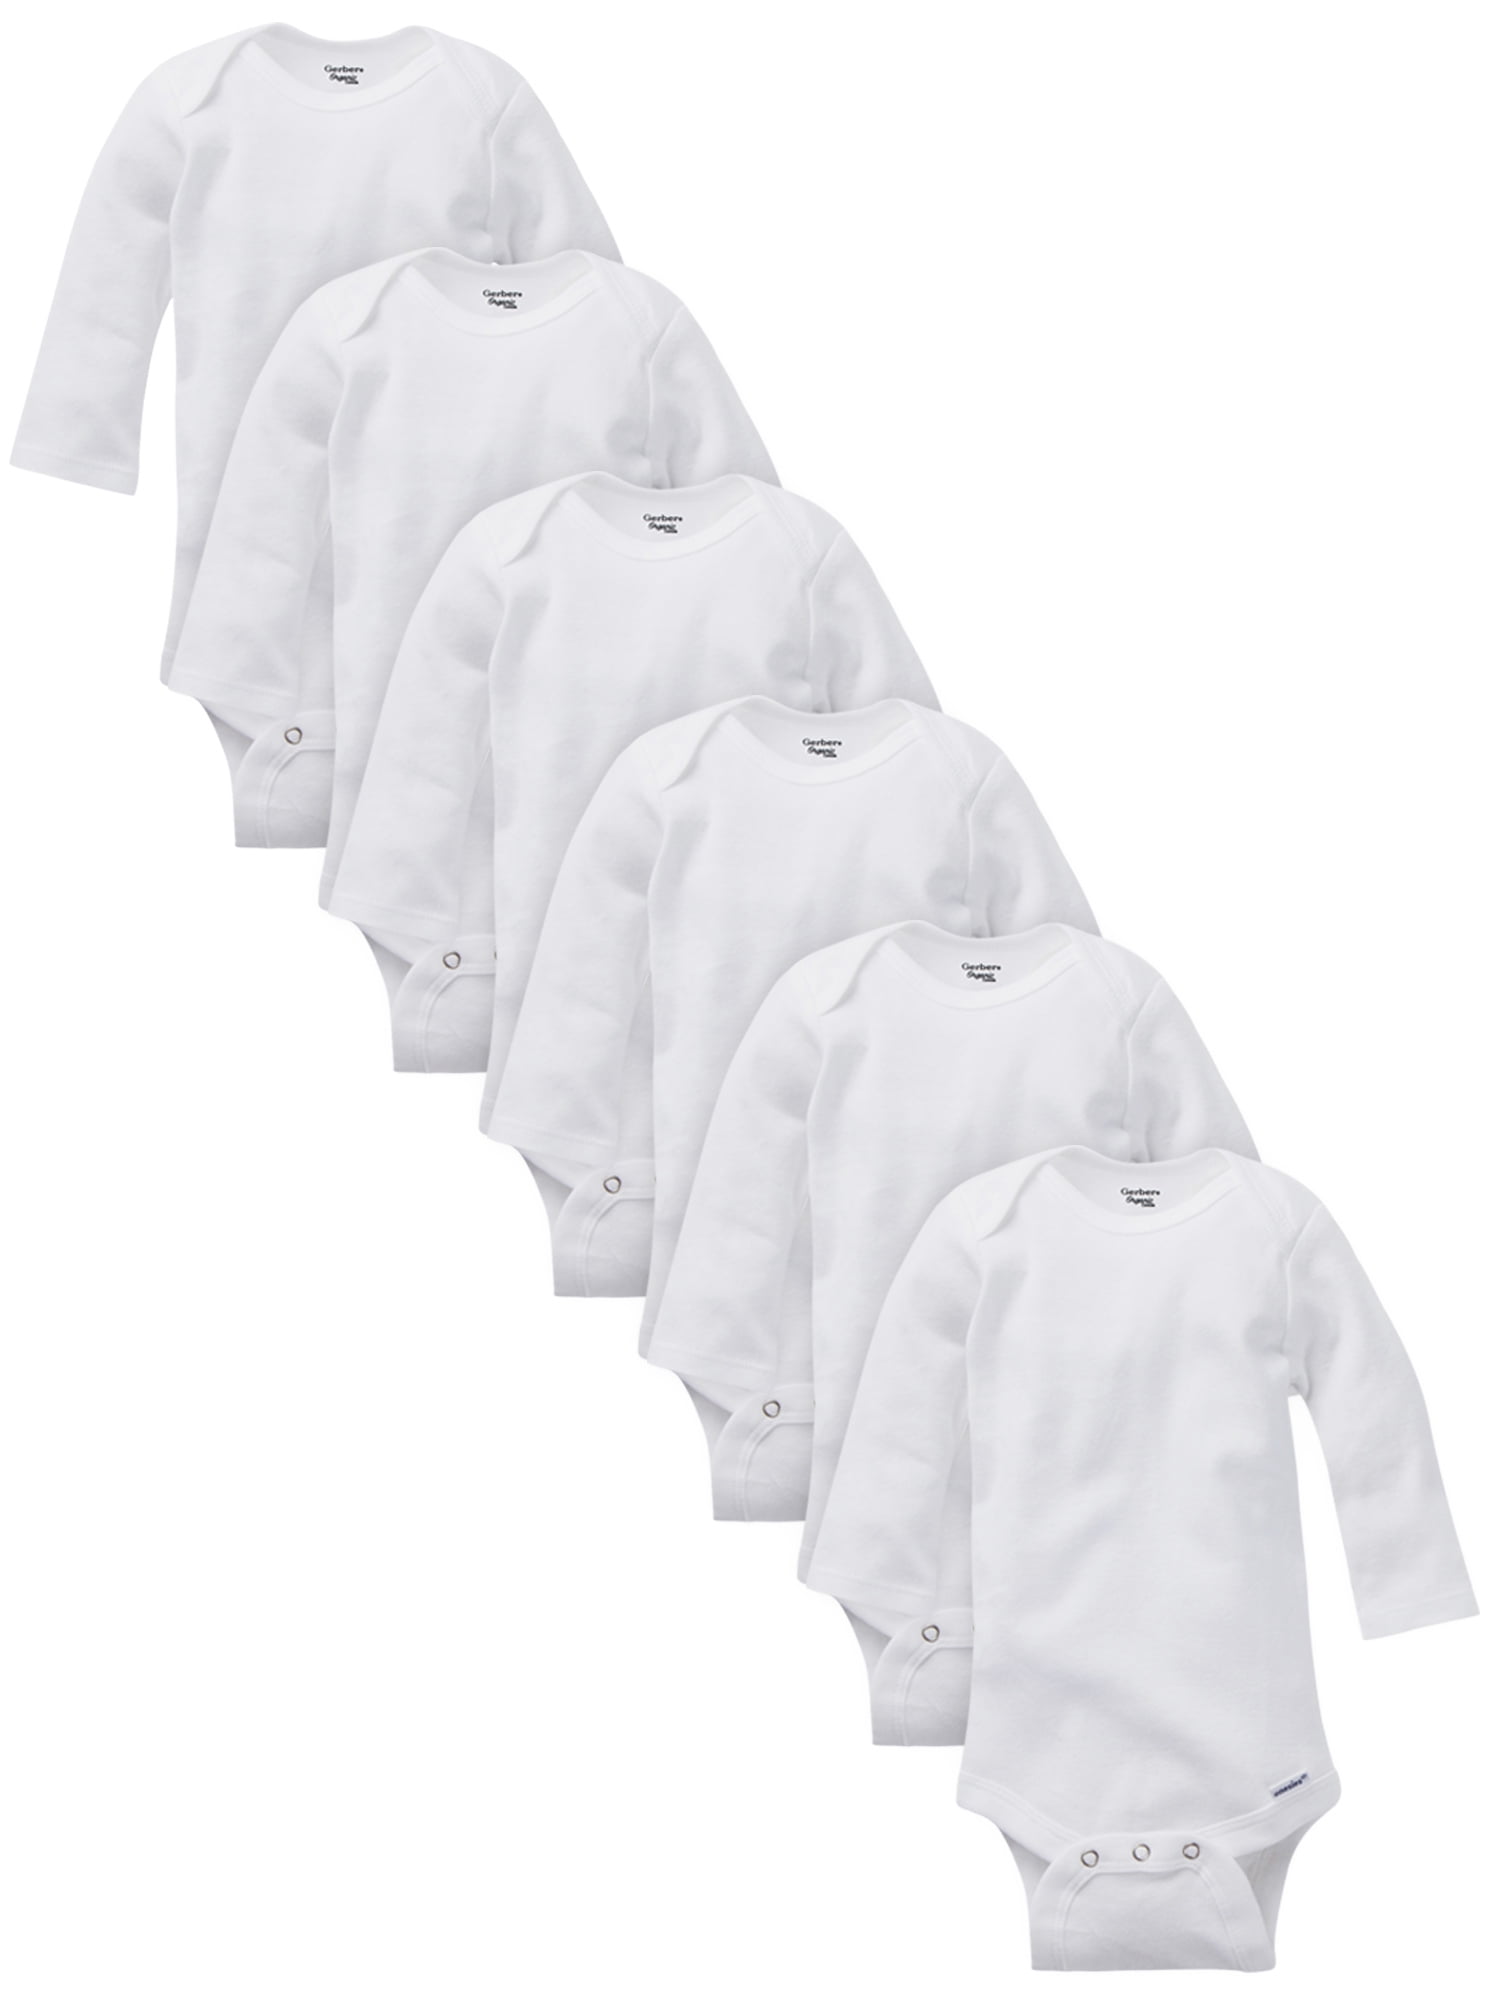 TupTam Baby Long Sleeve Bodysuit with Side Snap Pack of 5 